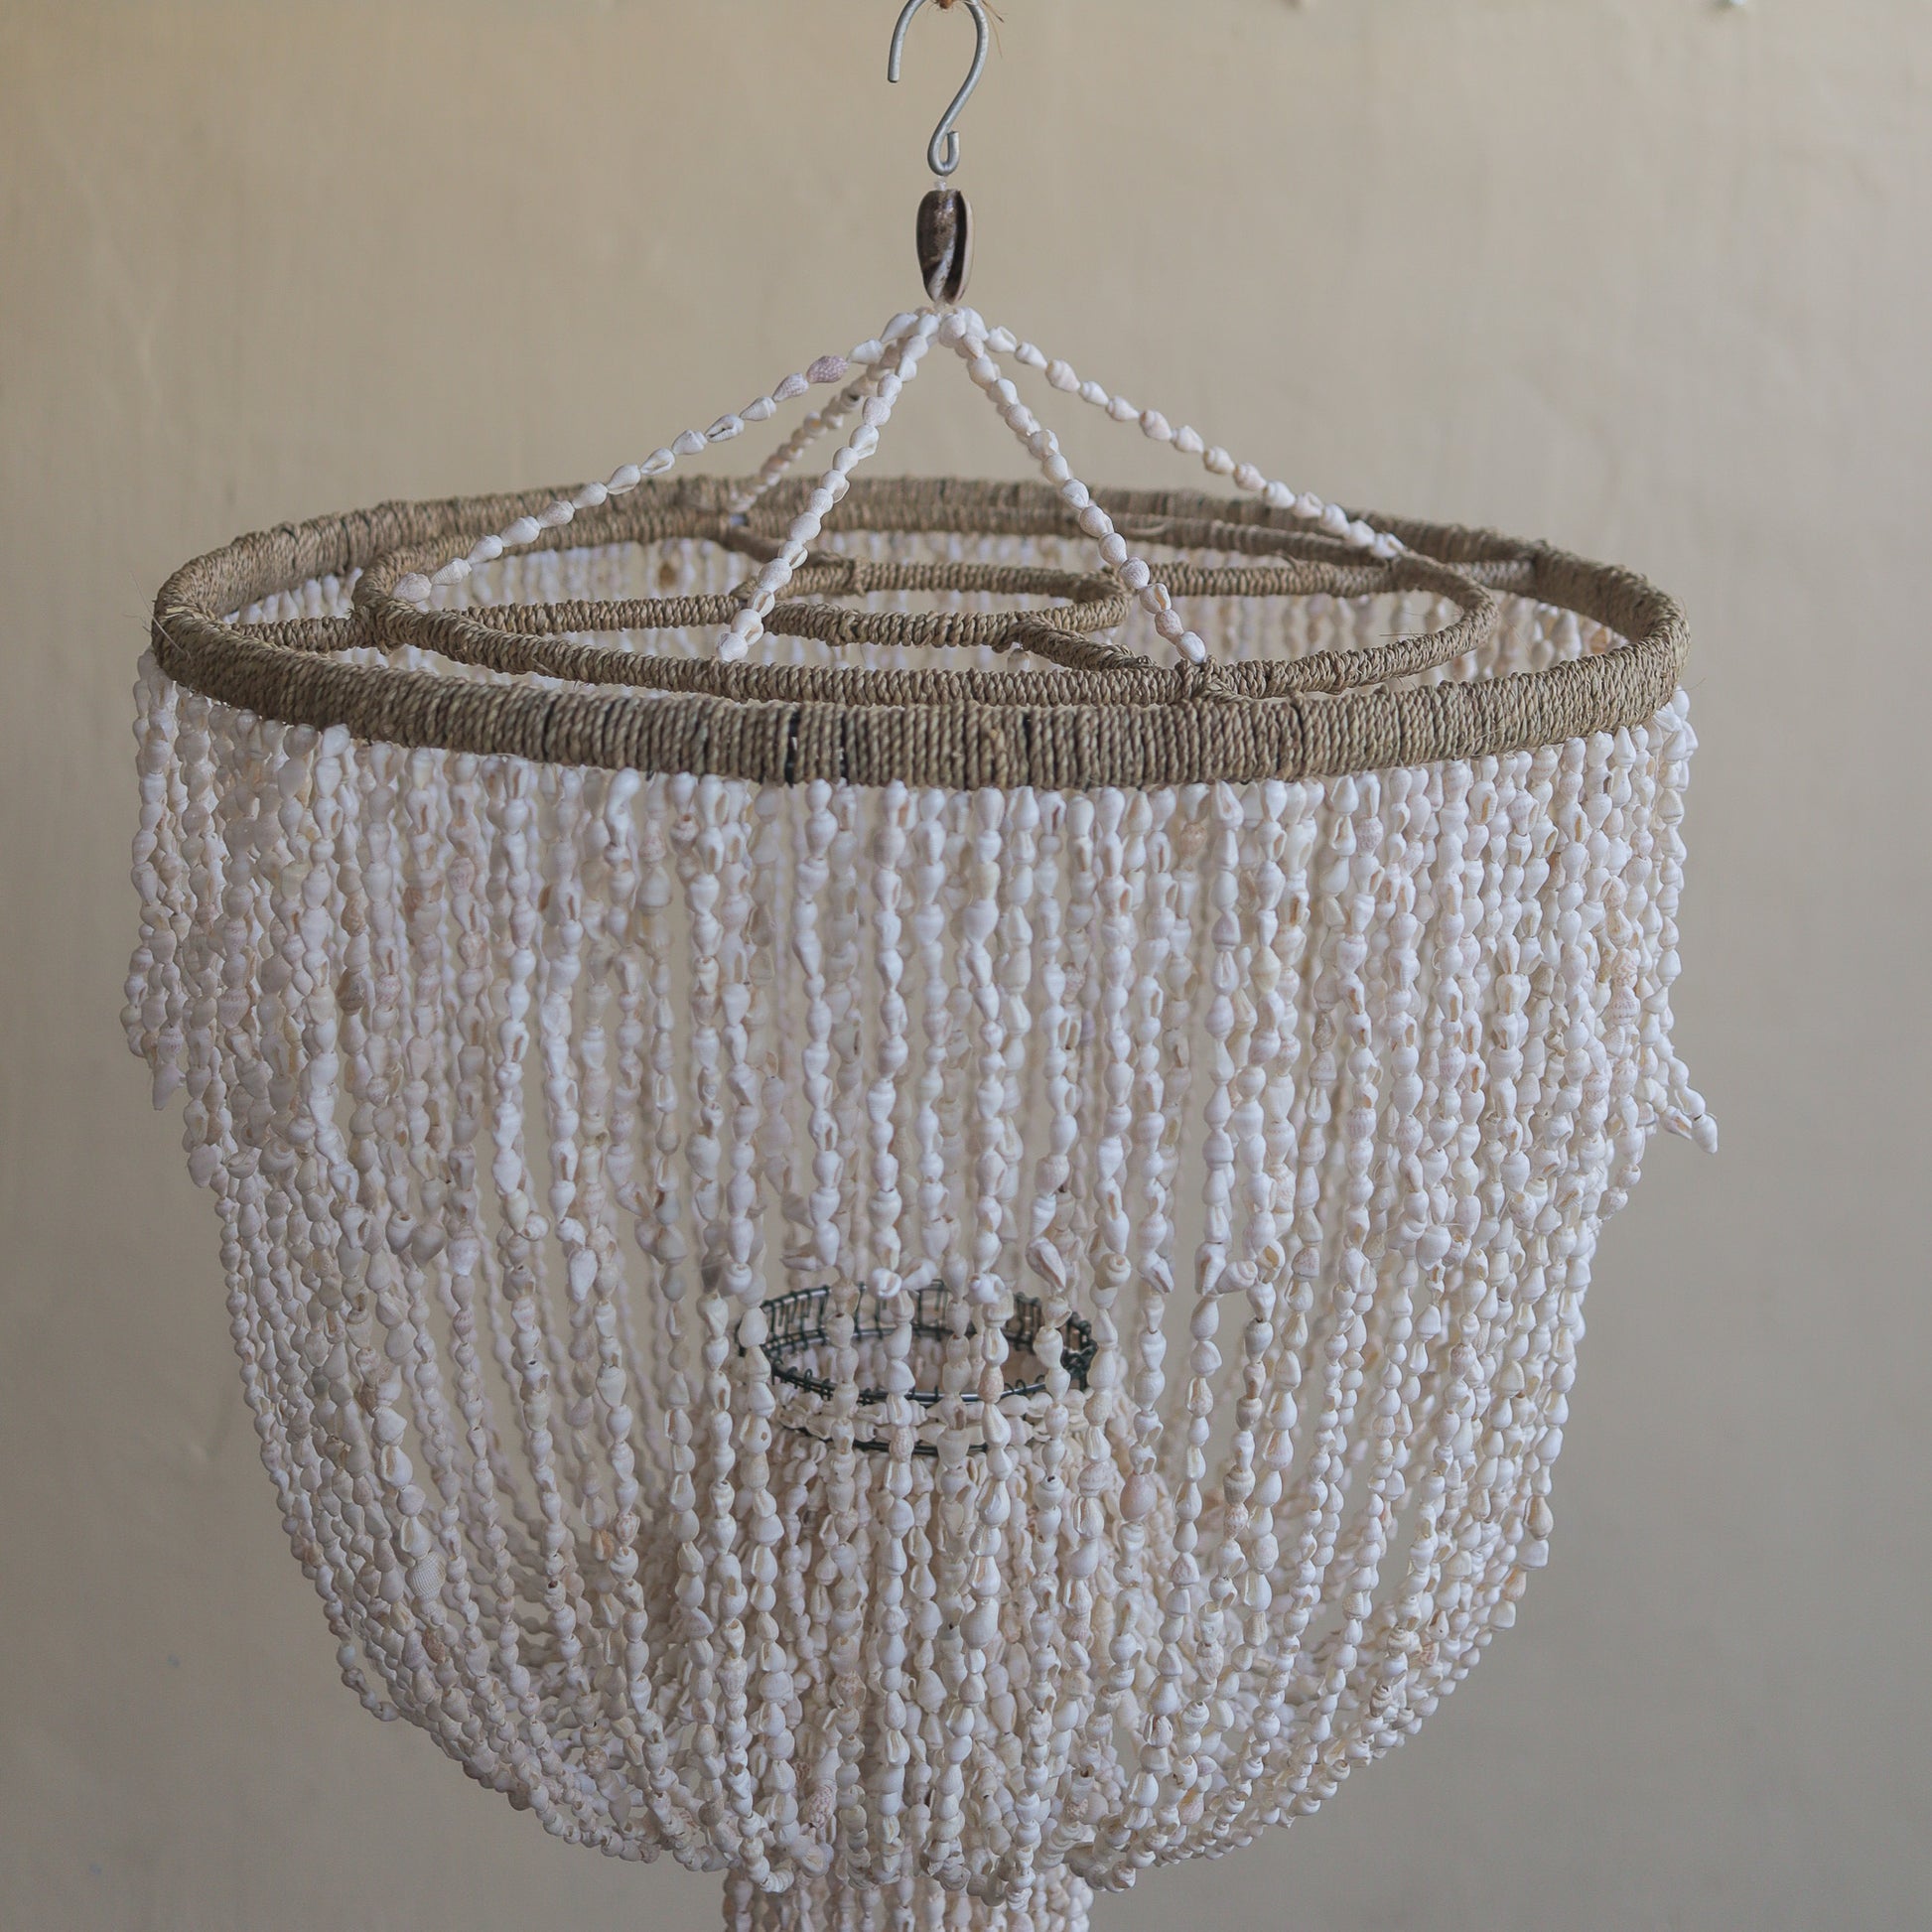 Chandelier made of natural seashell